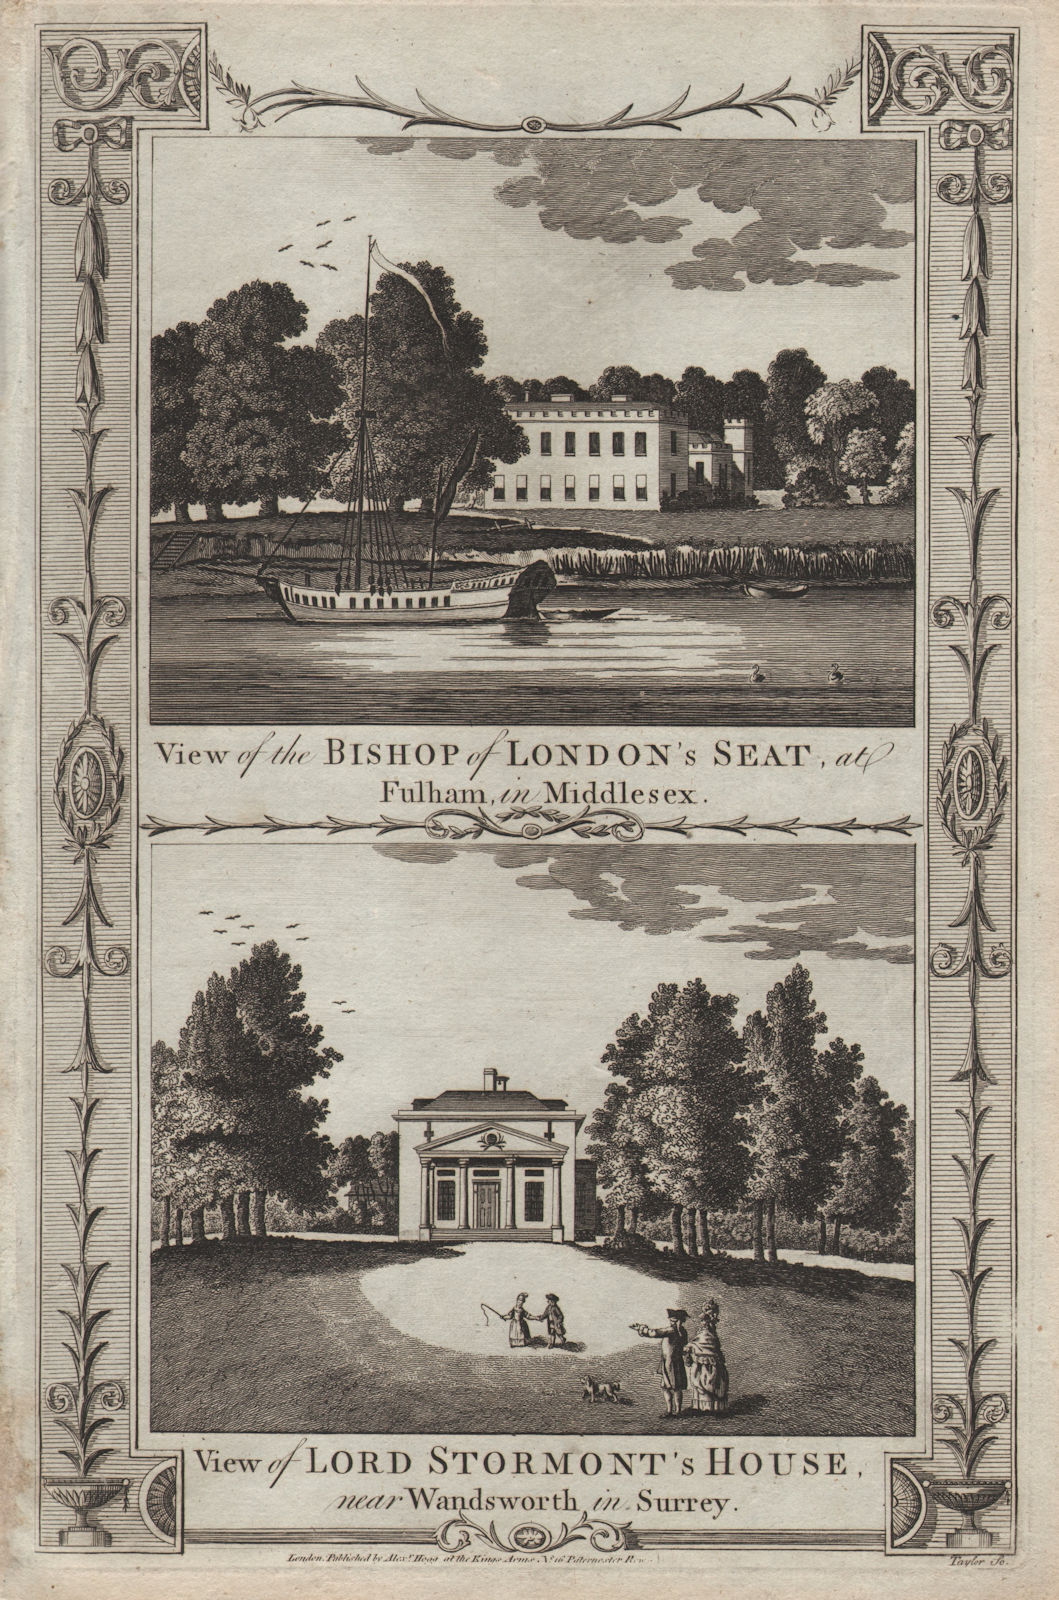 Fulham Palace. Lord Stormont's house, Wandsworth. THORNTON 1784 old print